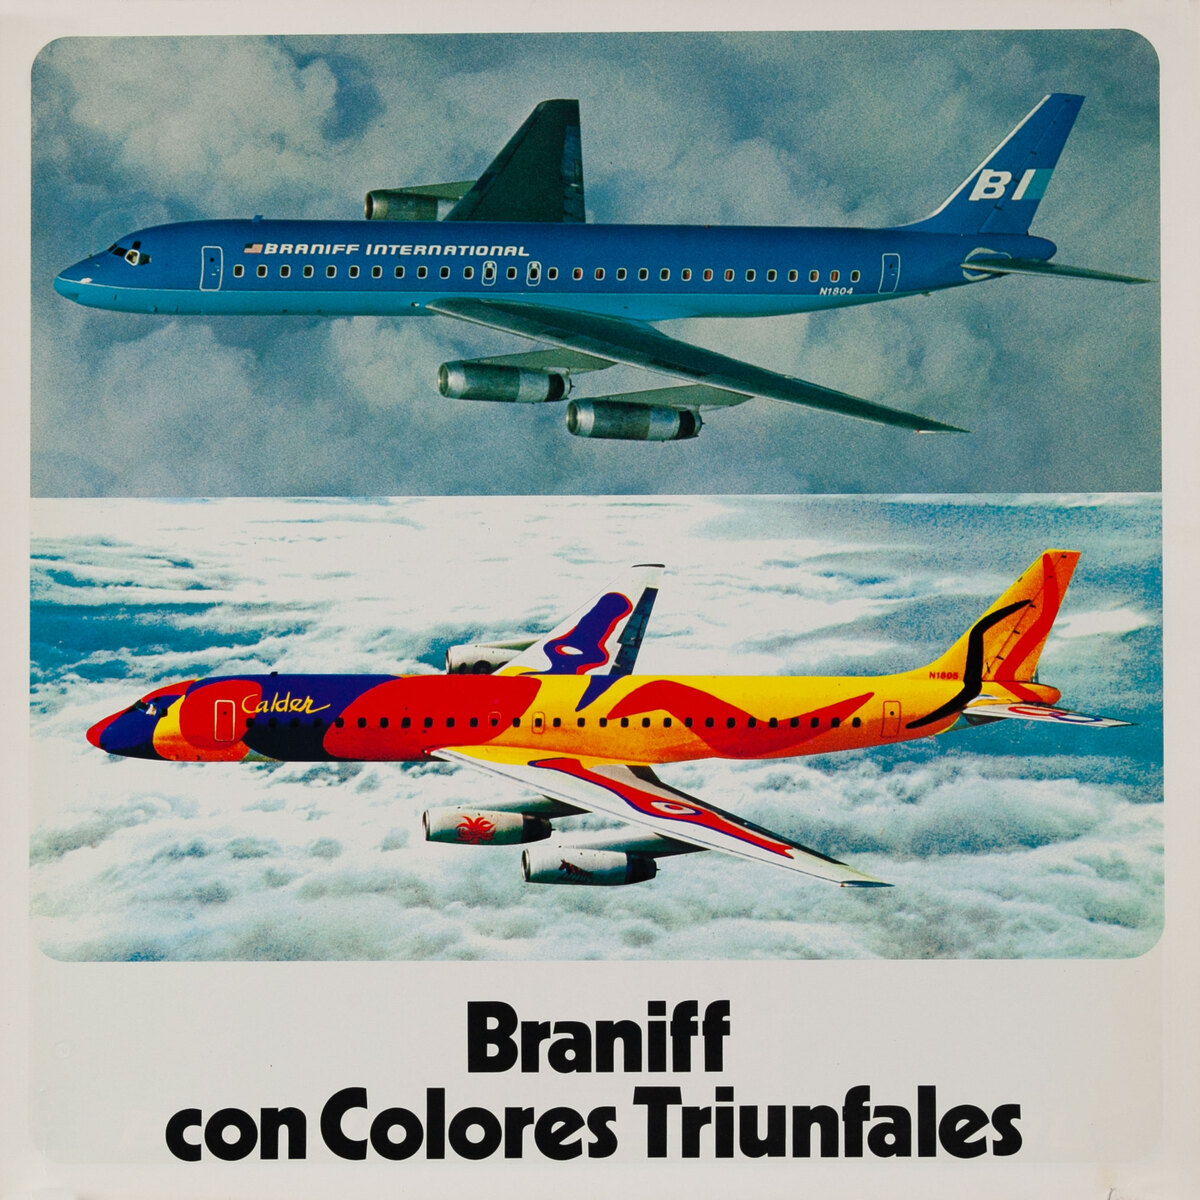 Braniff International - Con Colores Triunfales, 2 flying aircraft